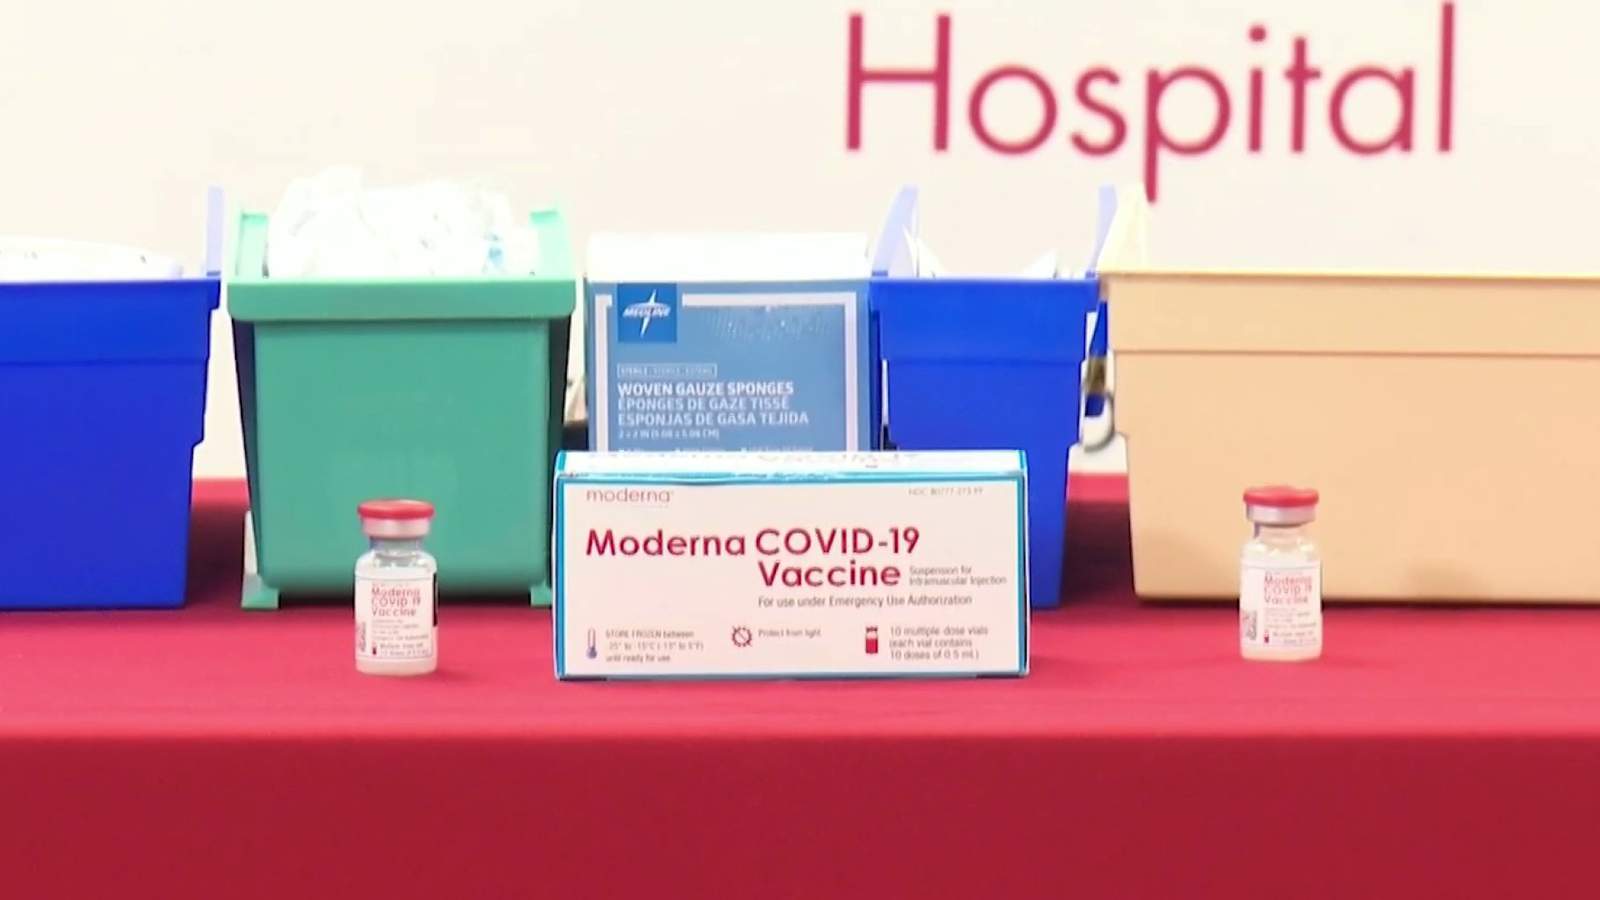 Governor announces plans to ramp up COVID-19 vaccination efforts throughout Florida